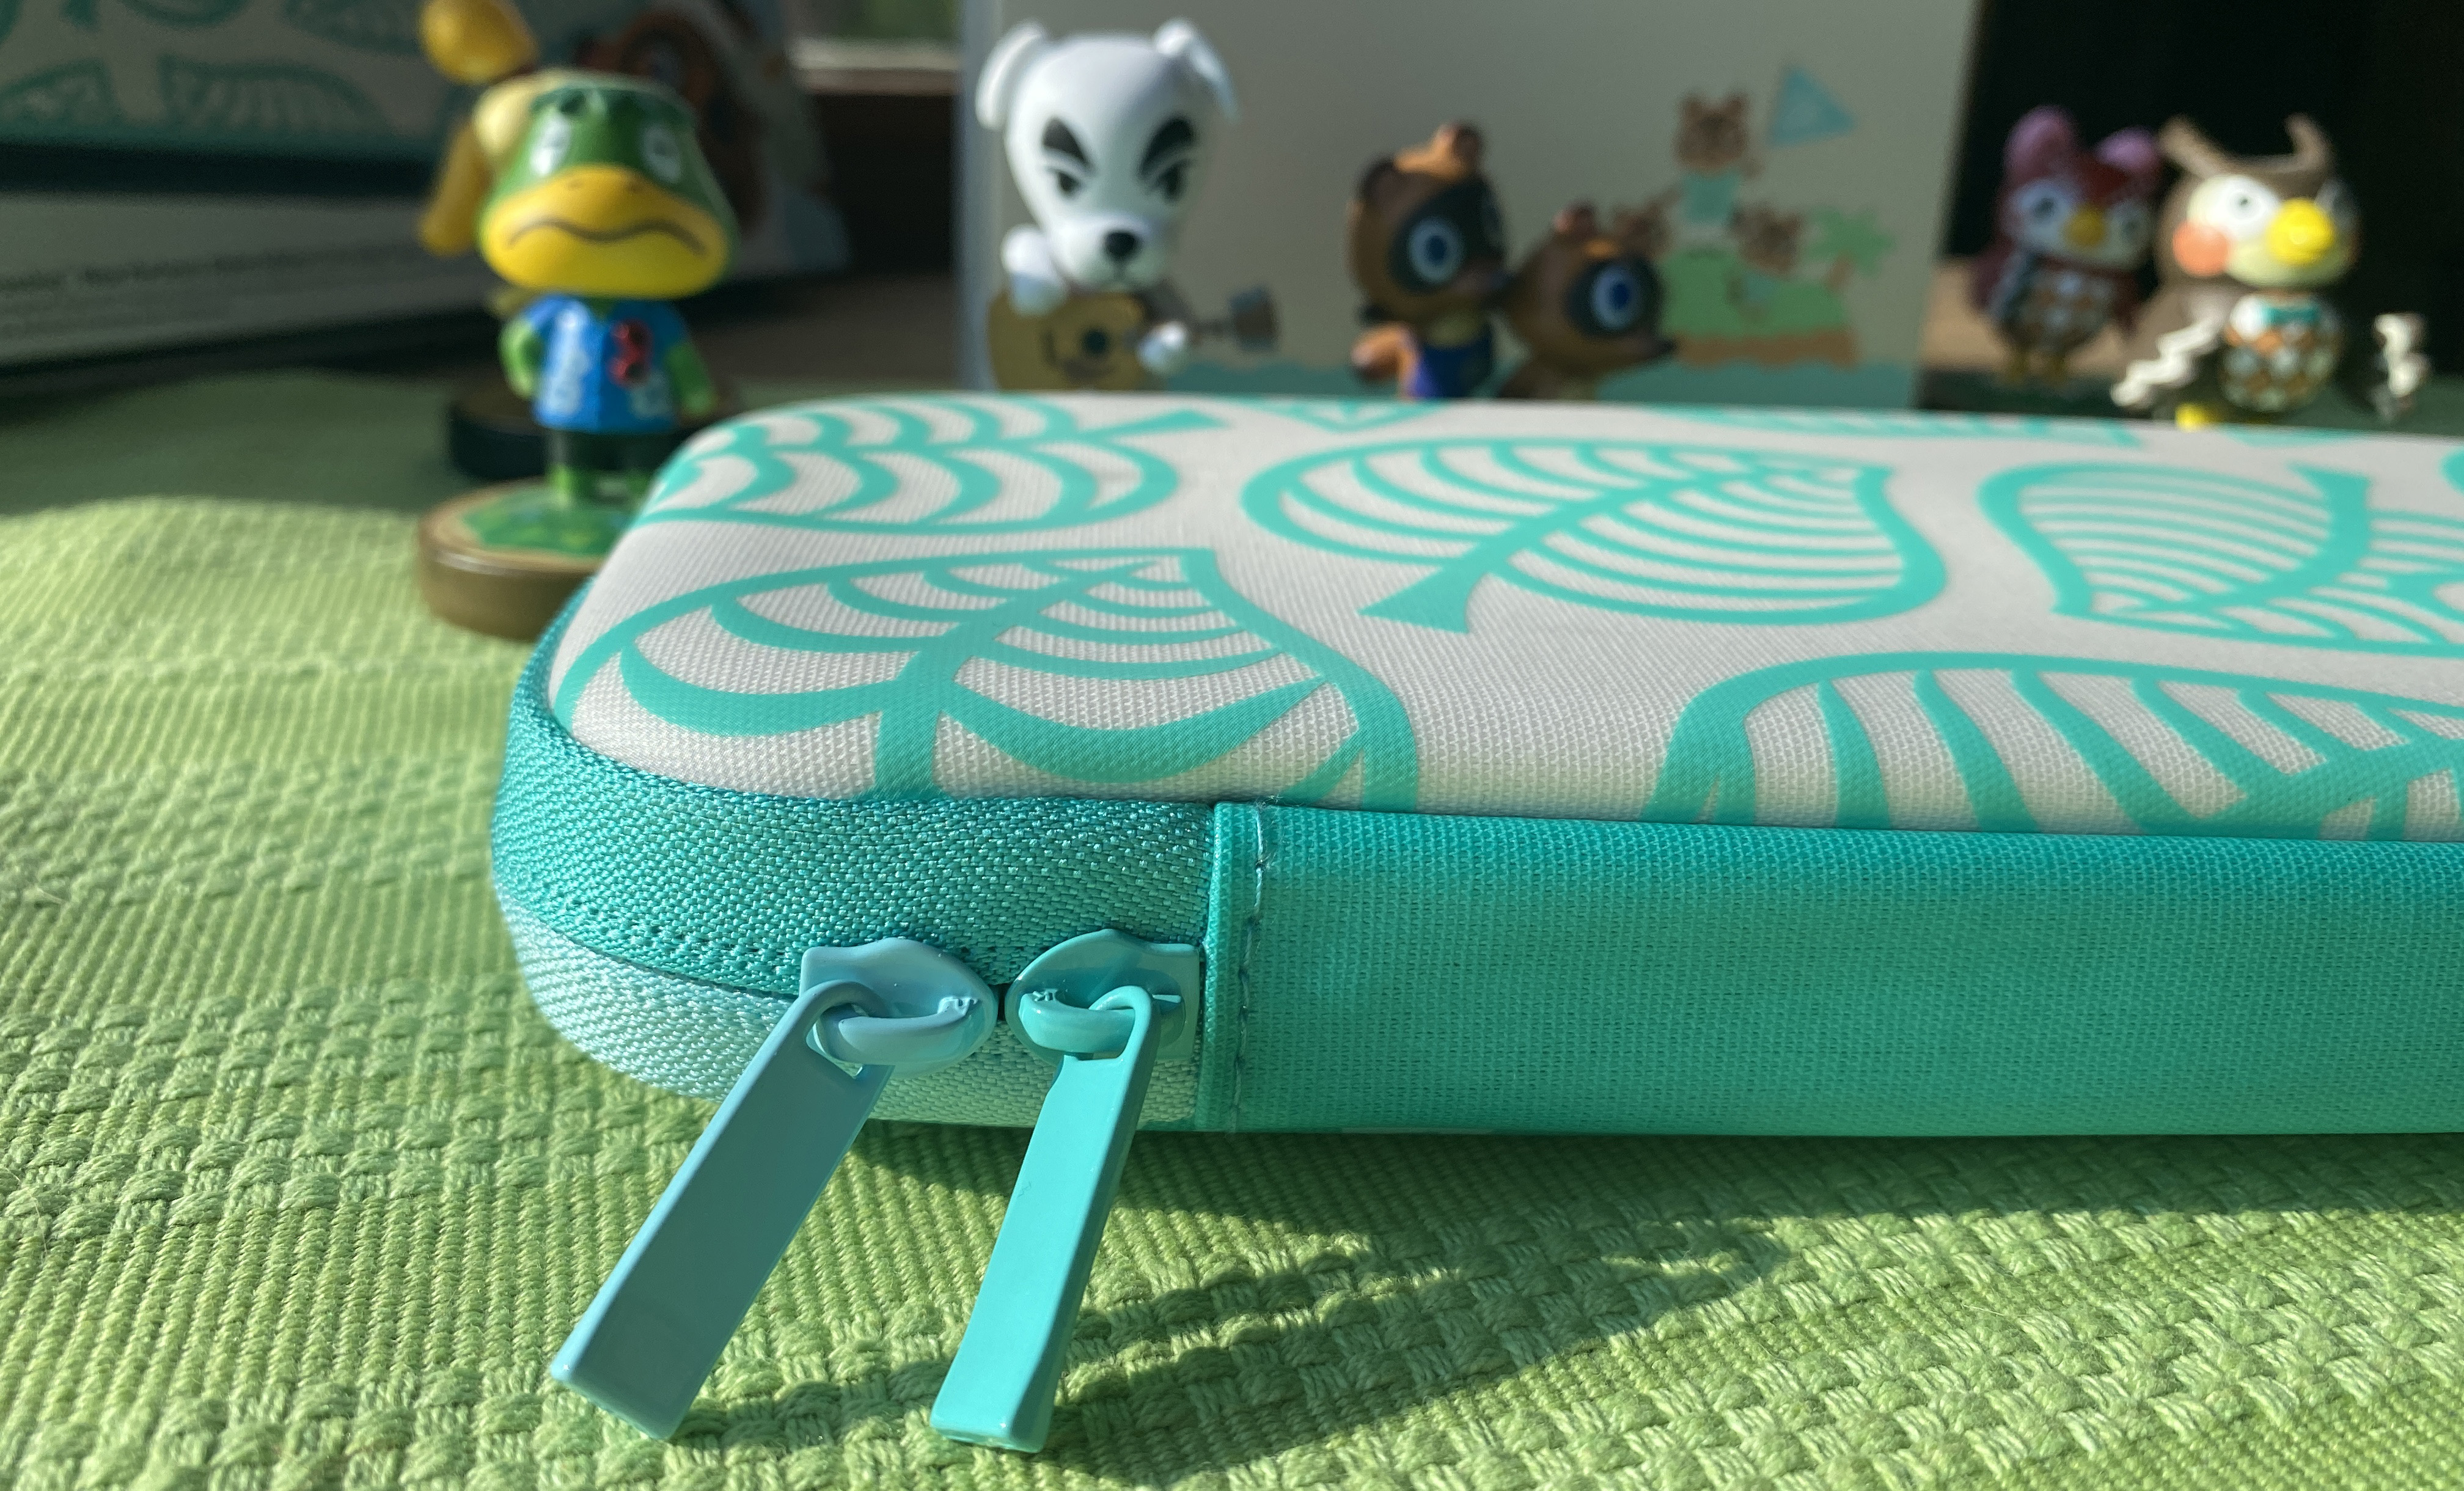 nintendo switch lite animal crossing carrying case